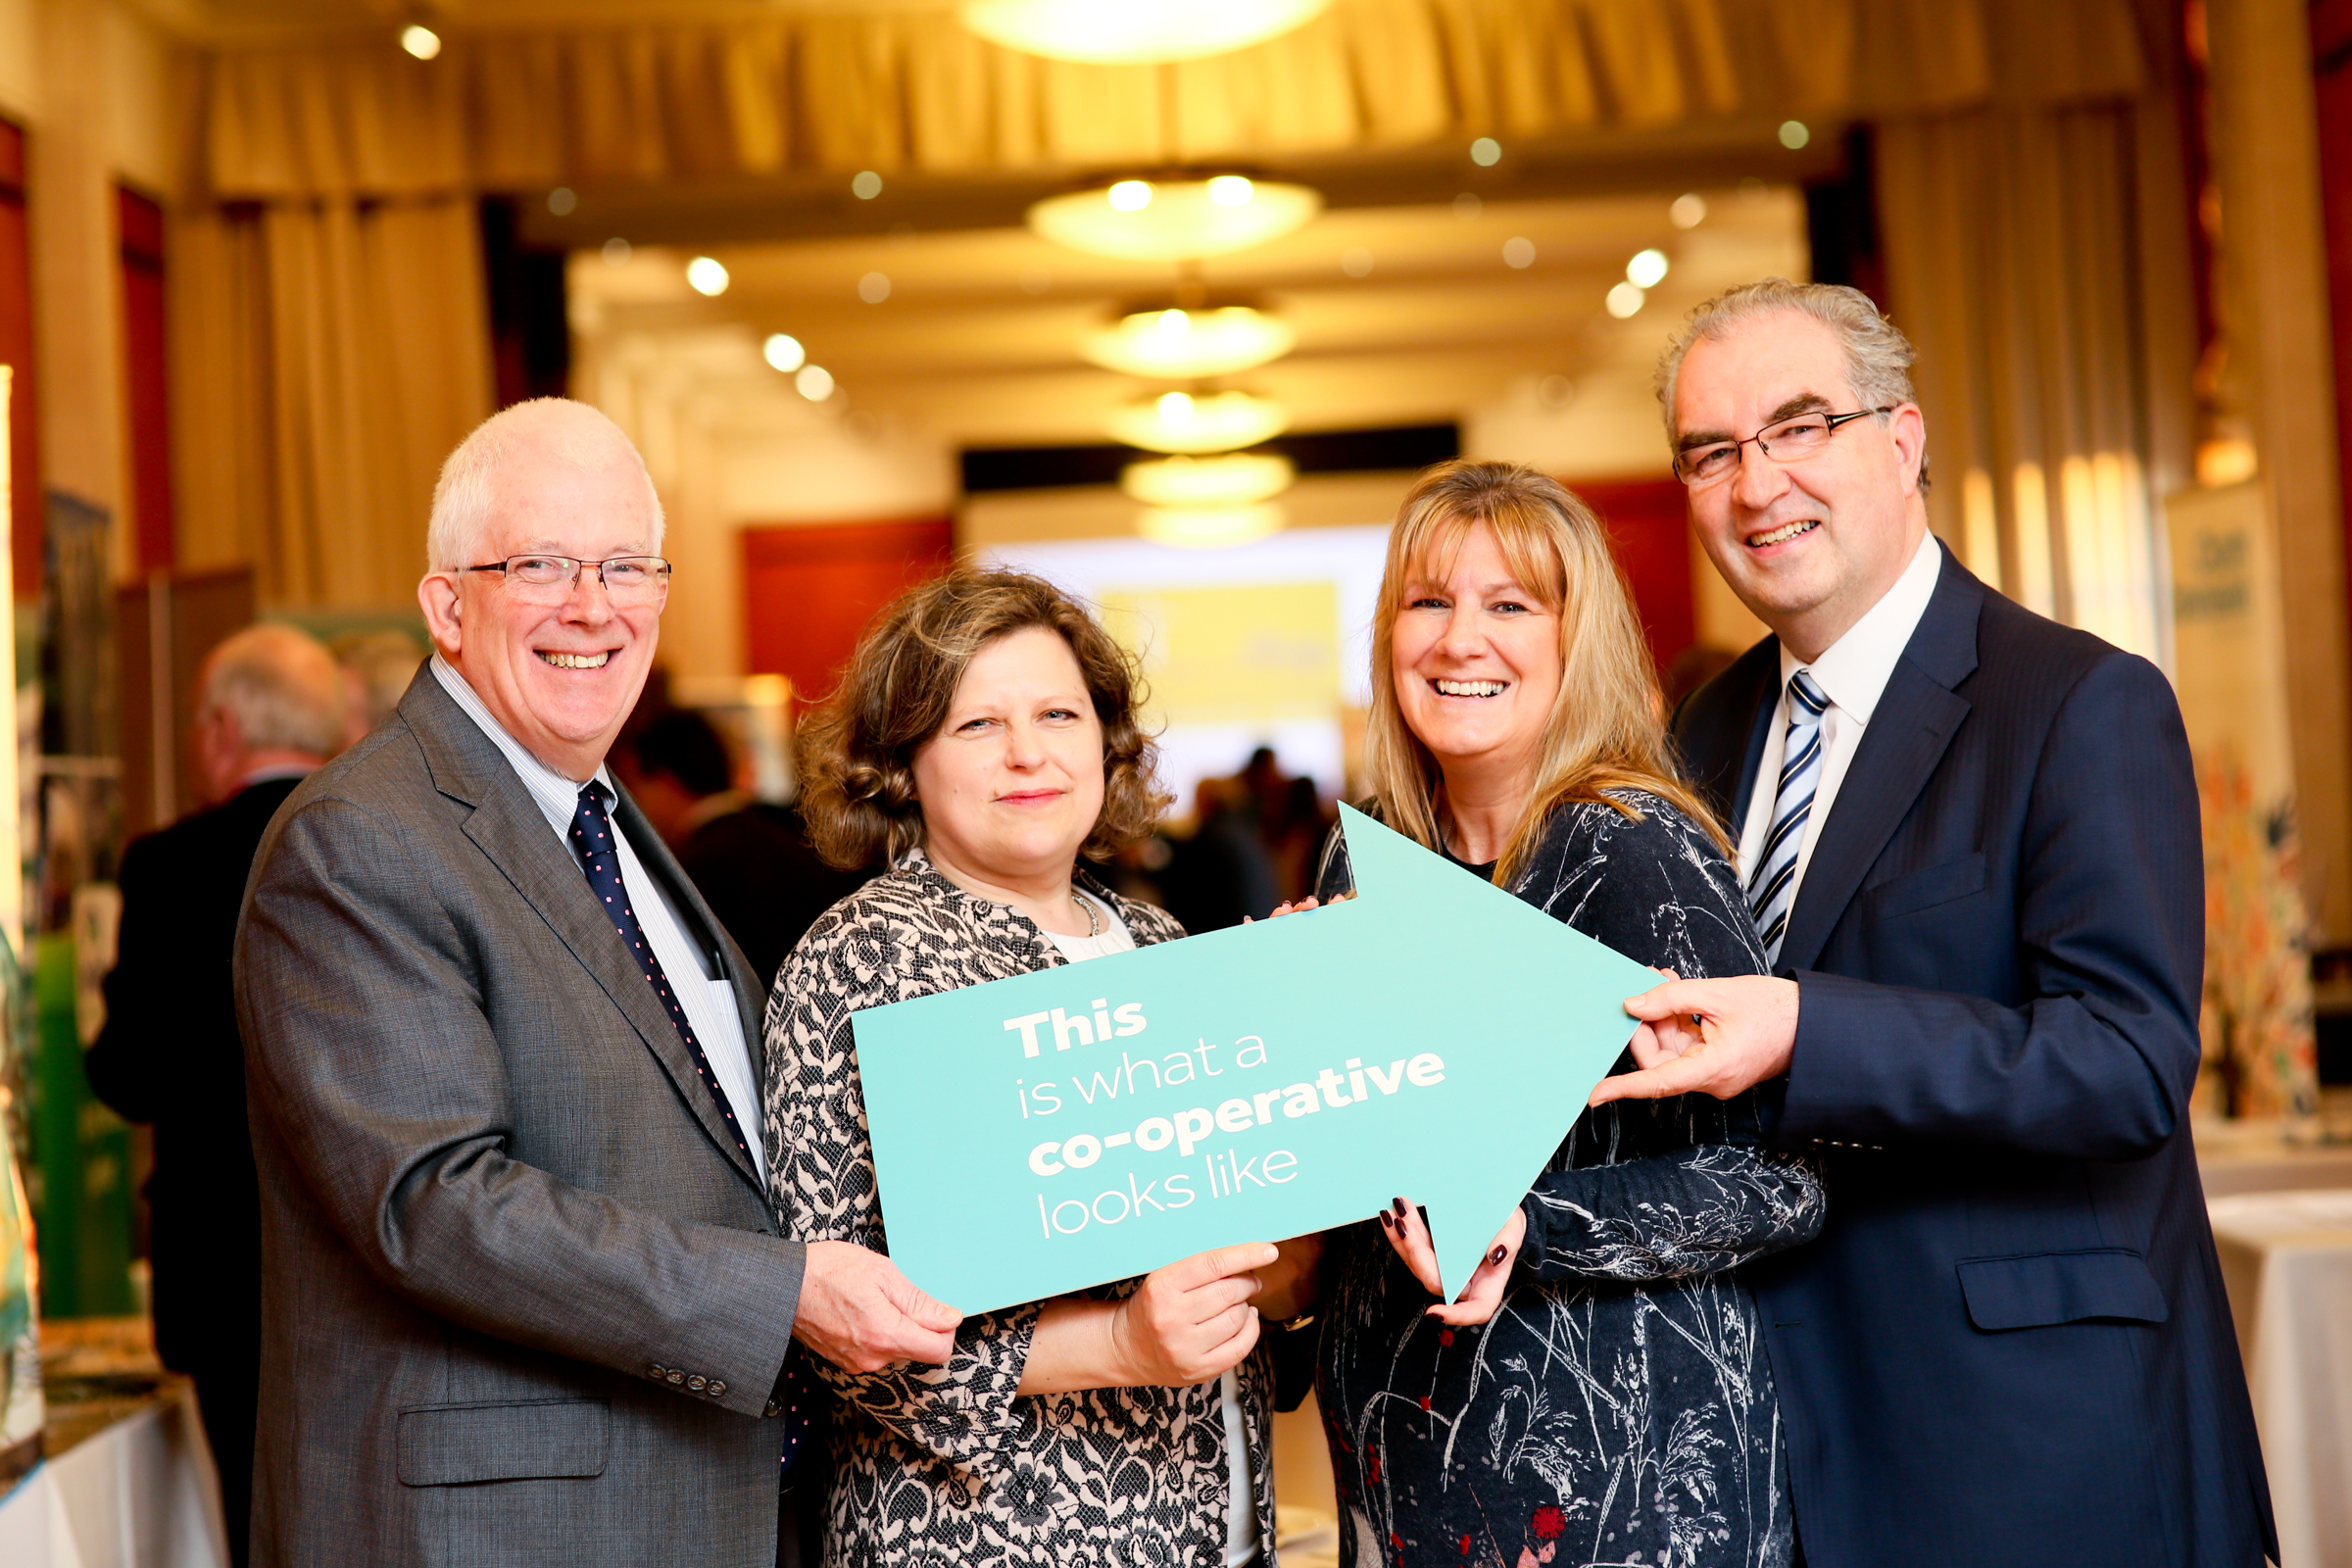 Call for Stormont to support co-operative model